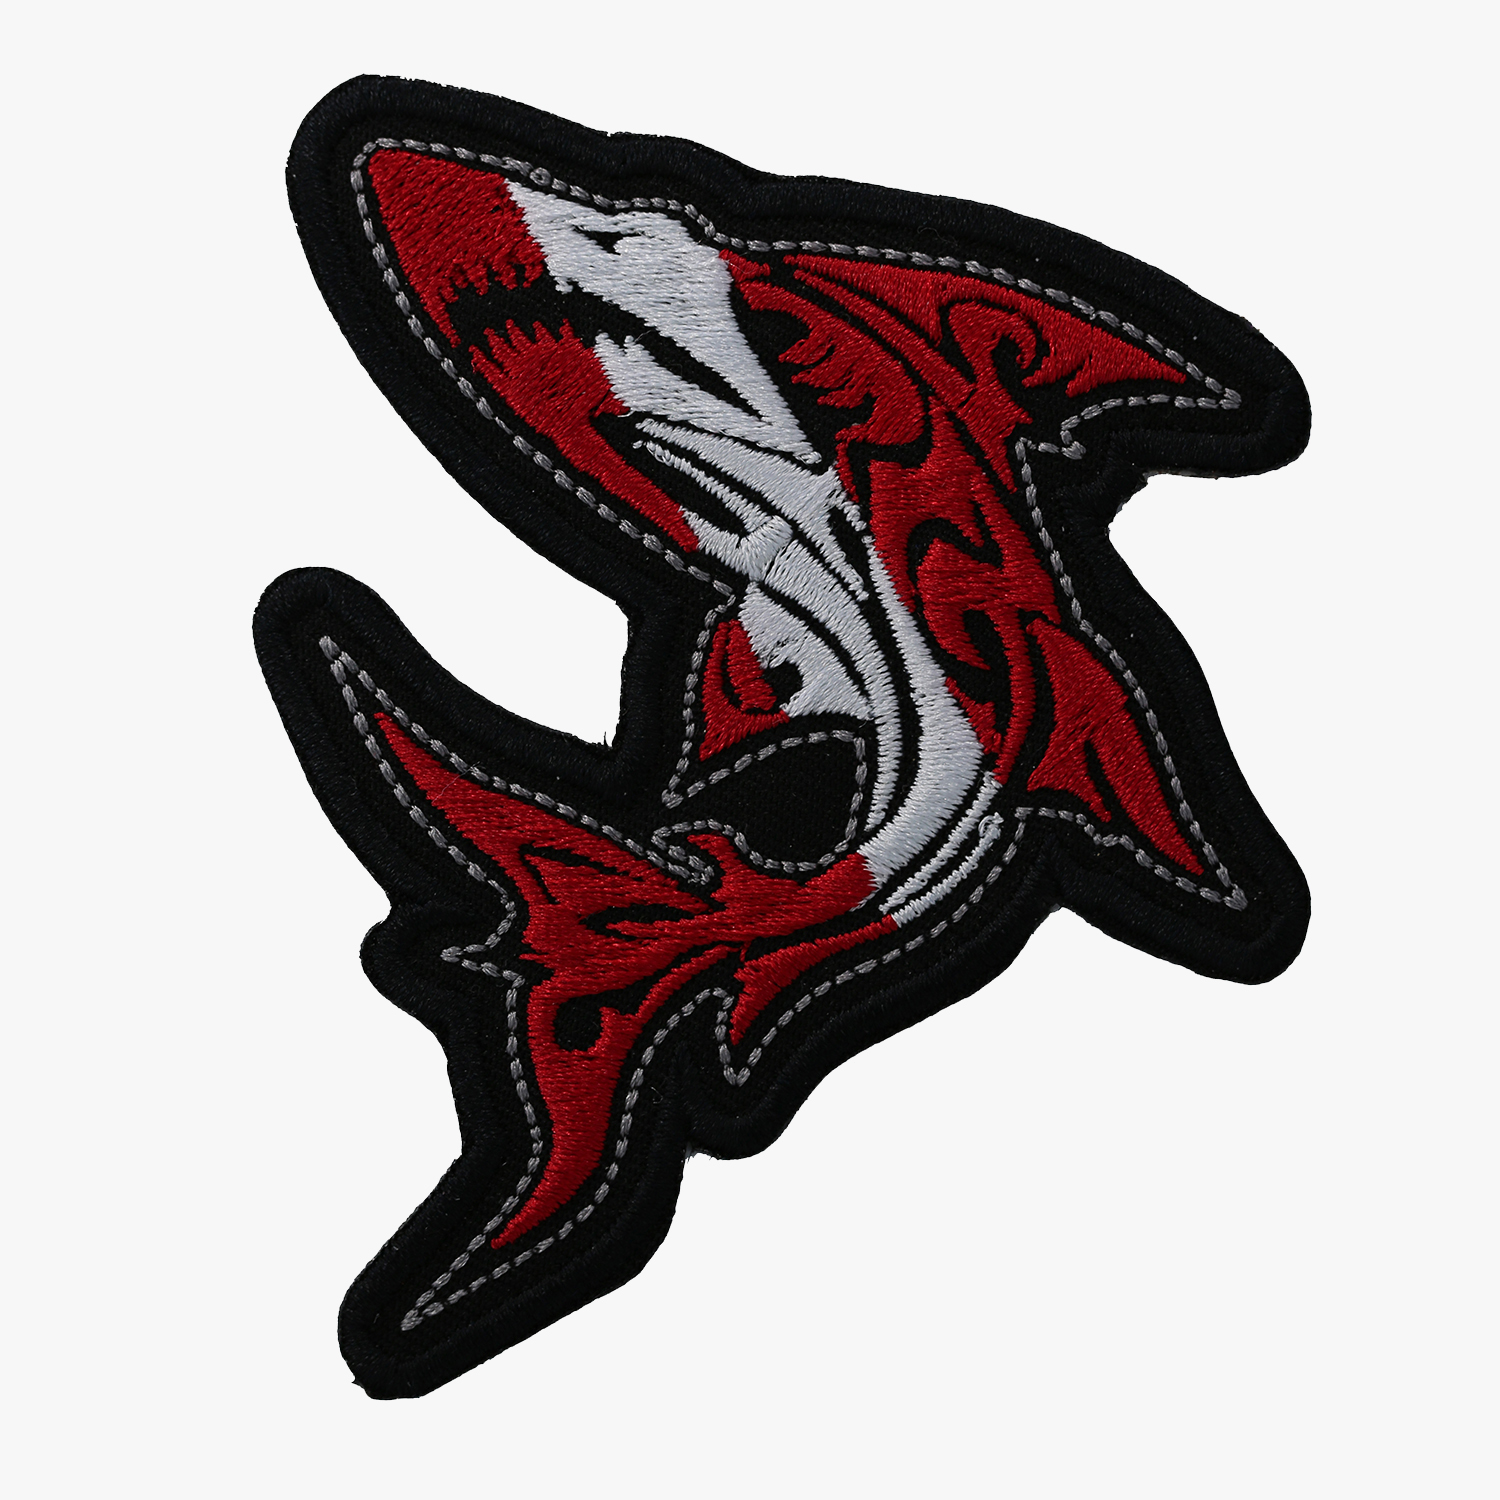 GREAT WHITE SHARK EMBROIDERED PATCH SCUBA DIVING iron-on DIVER DOWN EMBLEM GIFT 